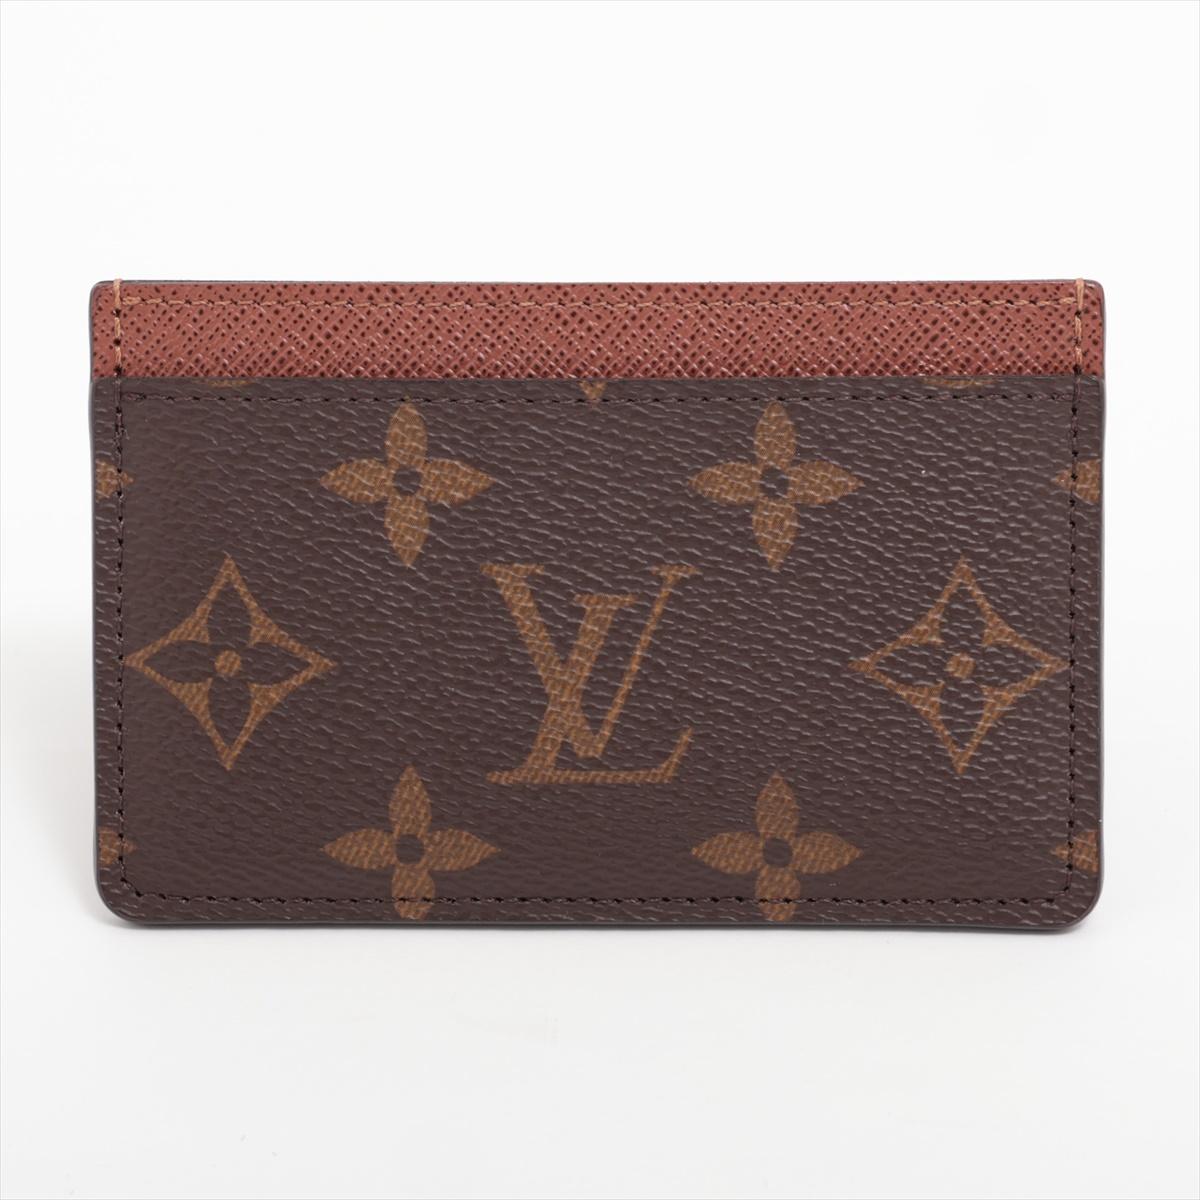 The Louis Vuitton Monogram Card Case in Brown is a stylish and compact accessory designed to keep your cards organized in style. The brown color adds a pop of color to your everyday essentials, making them easy to locate in your bag or pocket. The